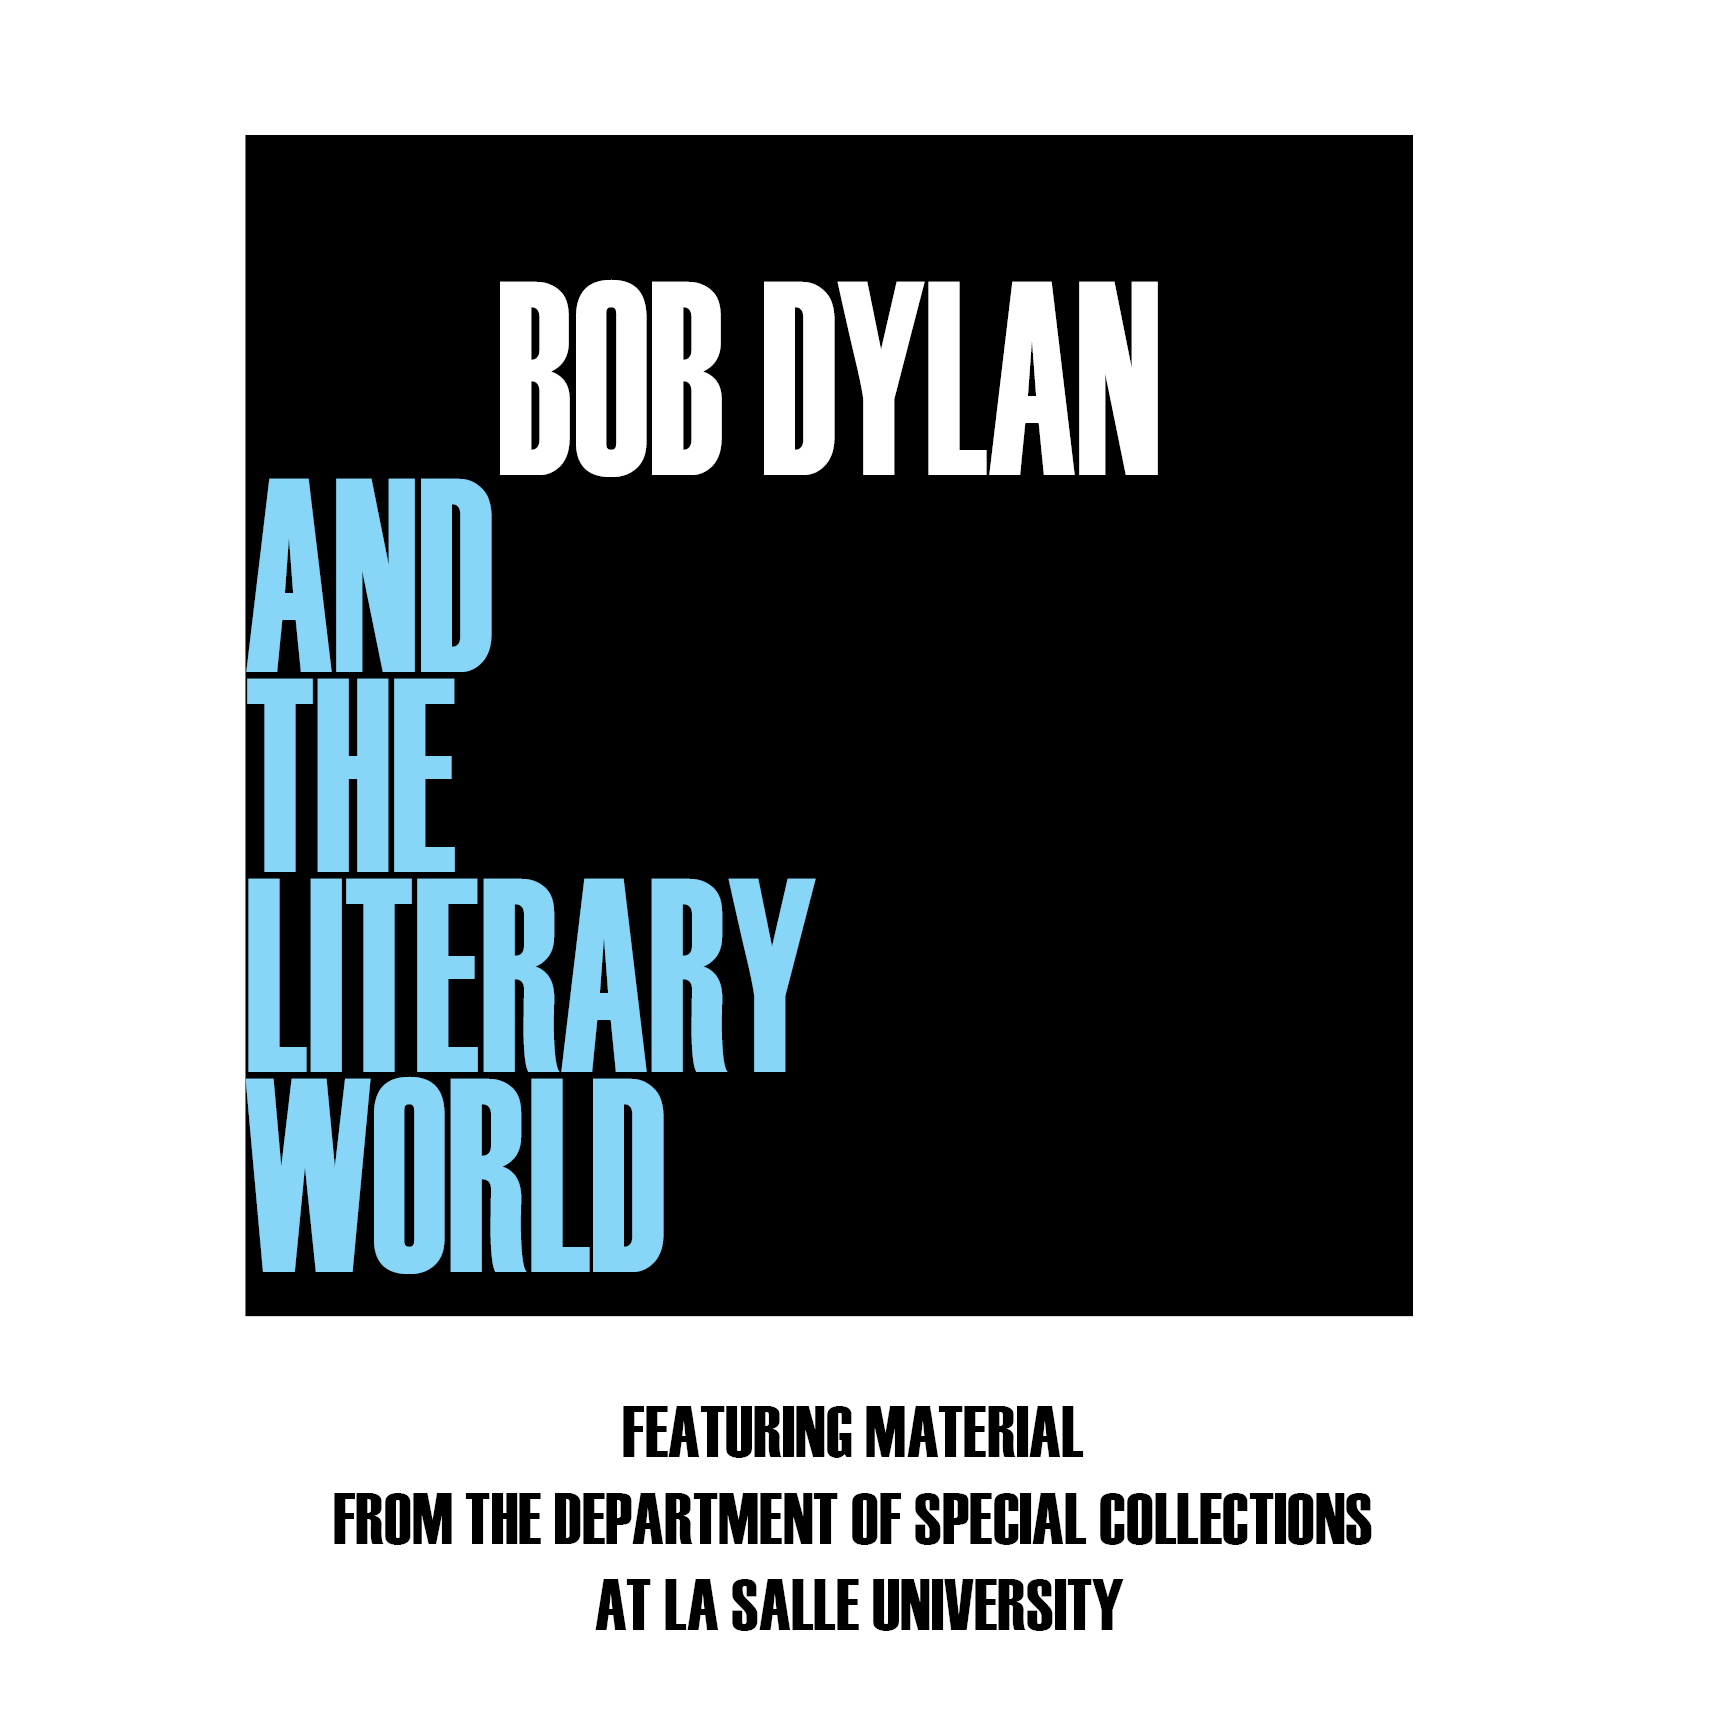 Bob Dylan and the Literary World